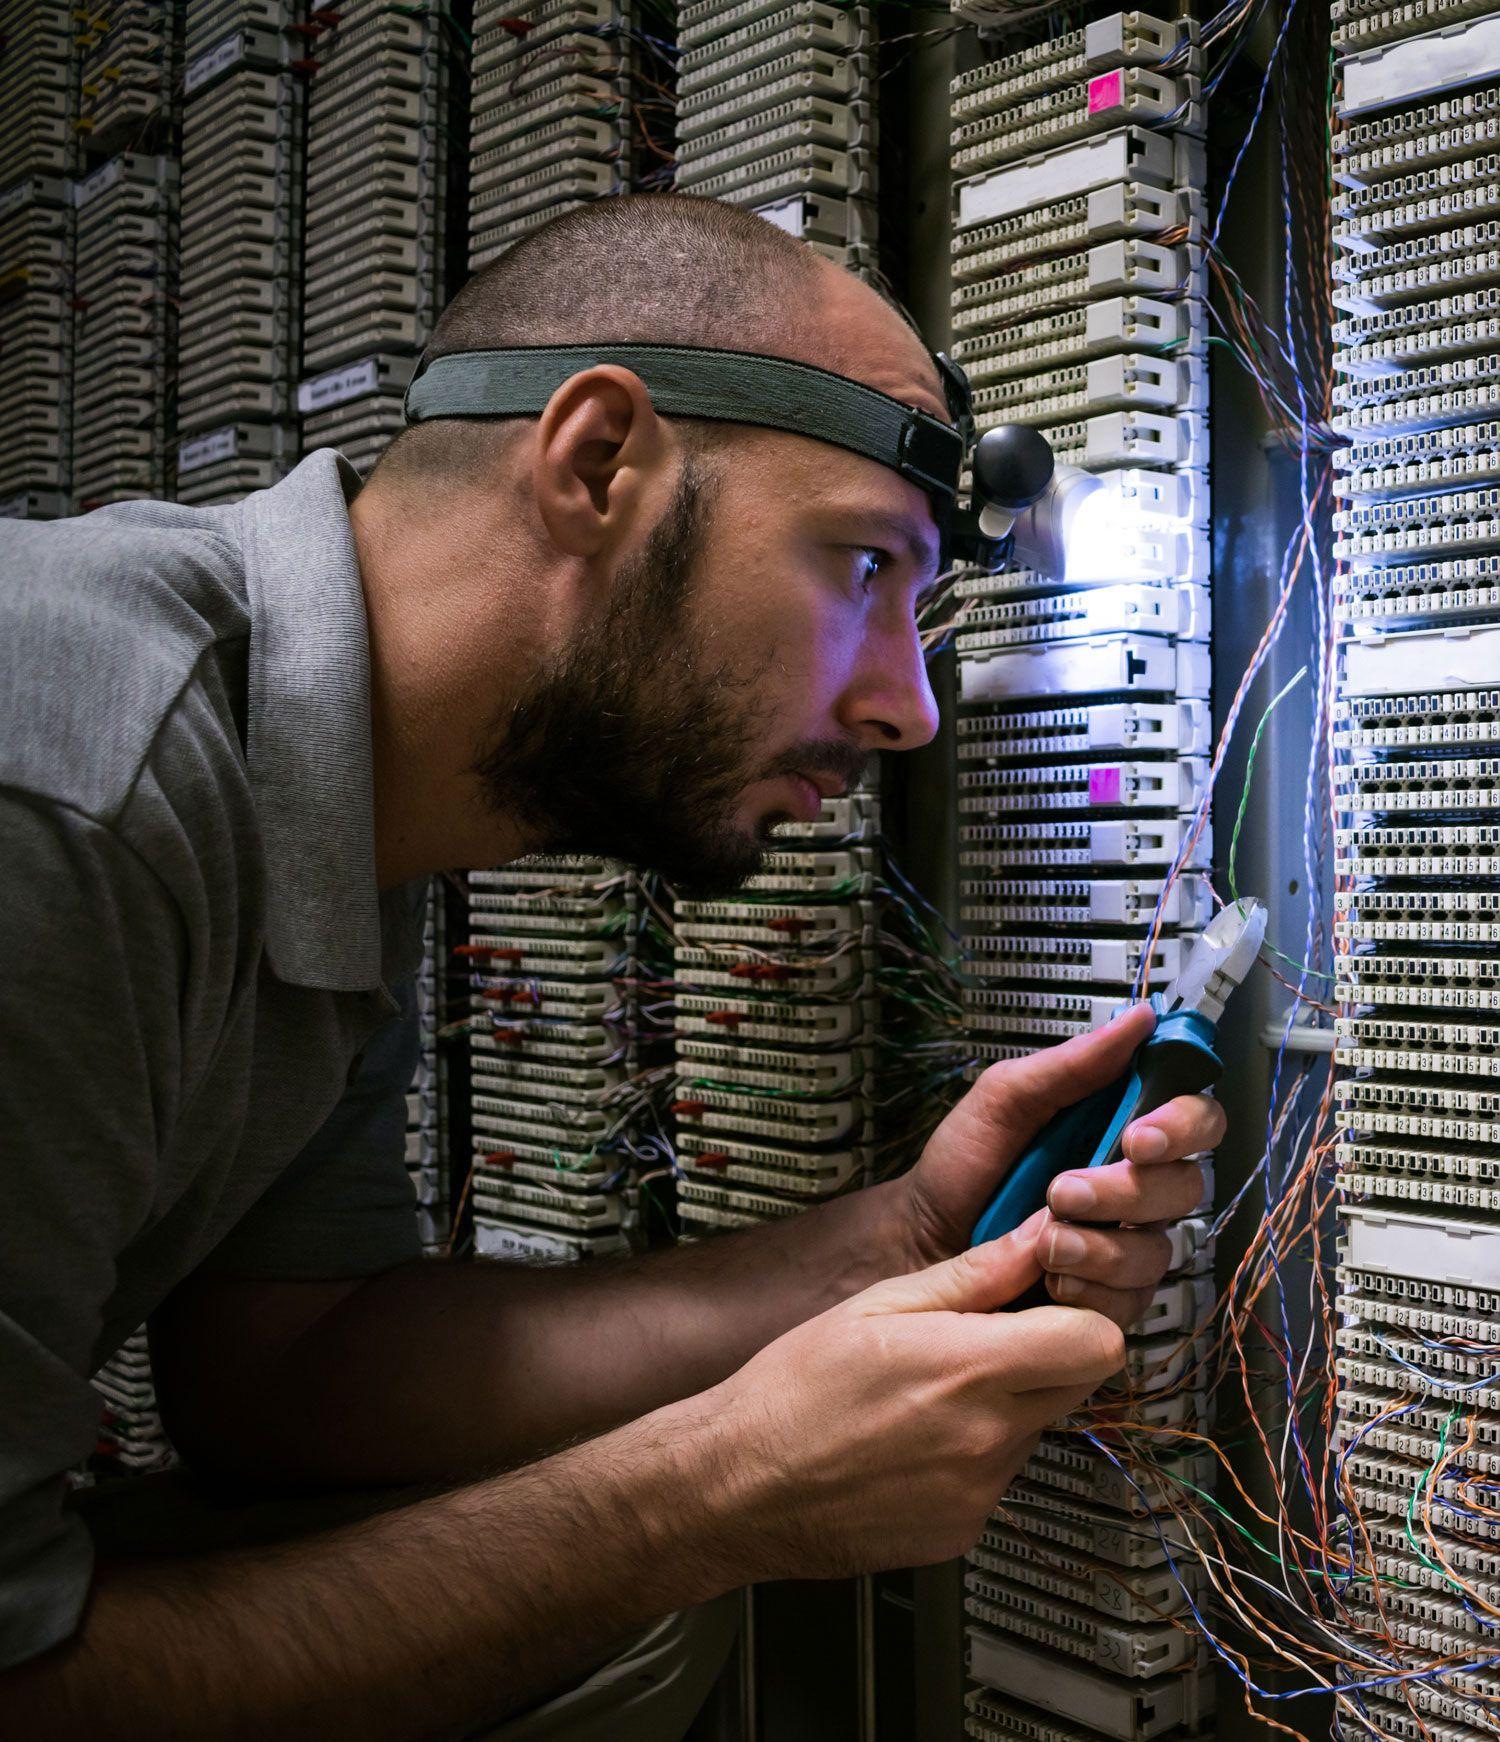 A technical expert inspecting a computer server and carrying out repairs